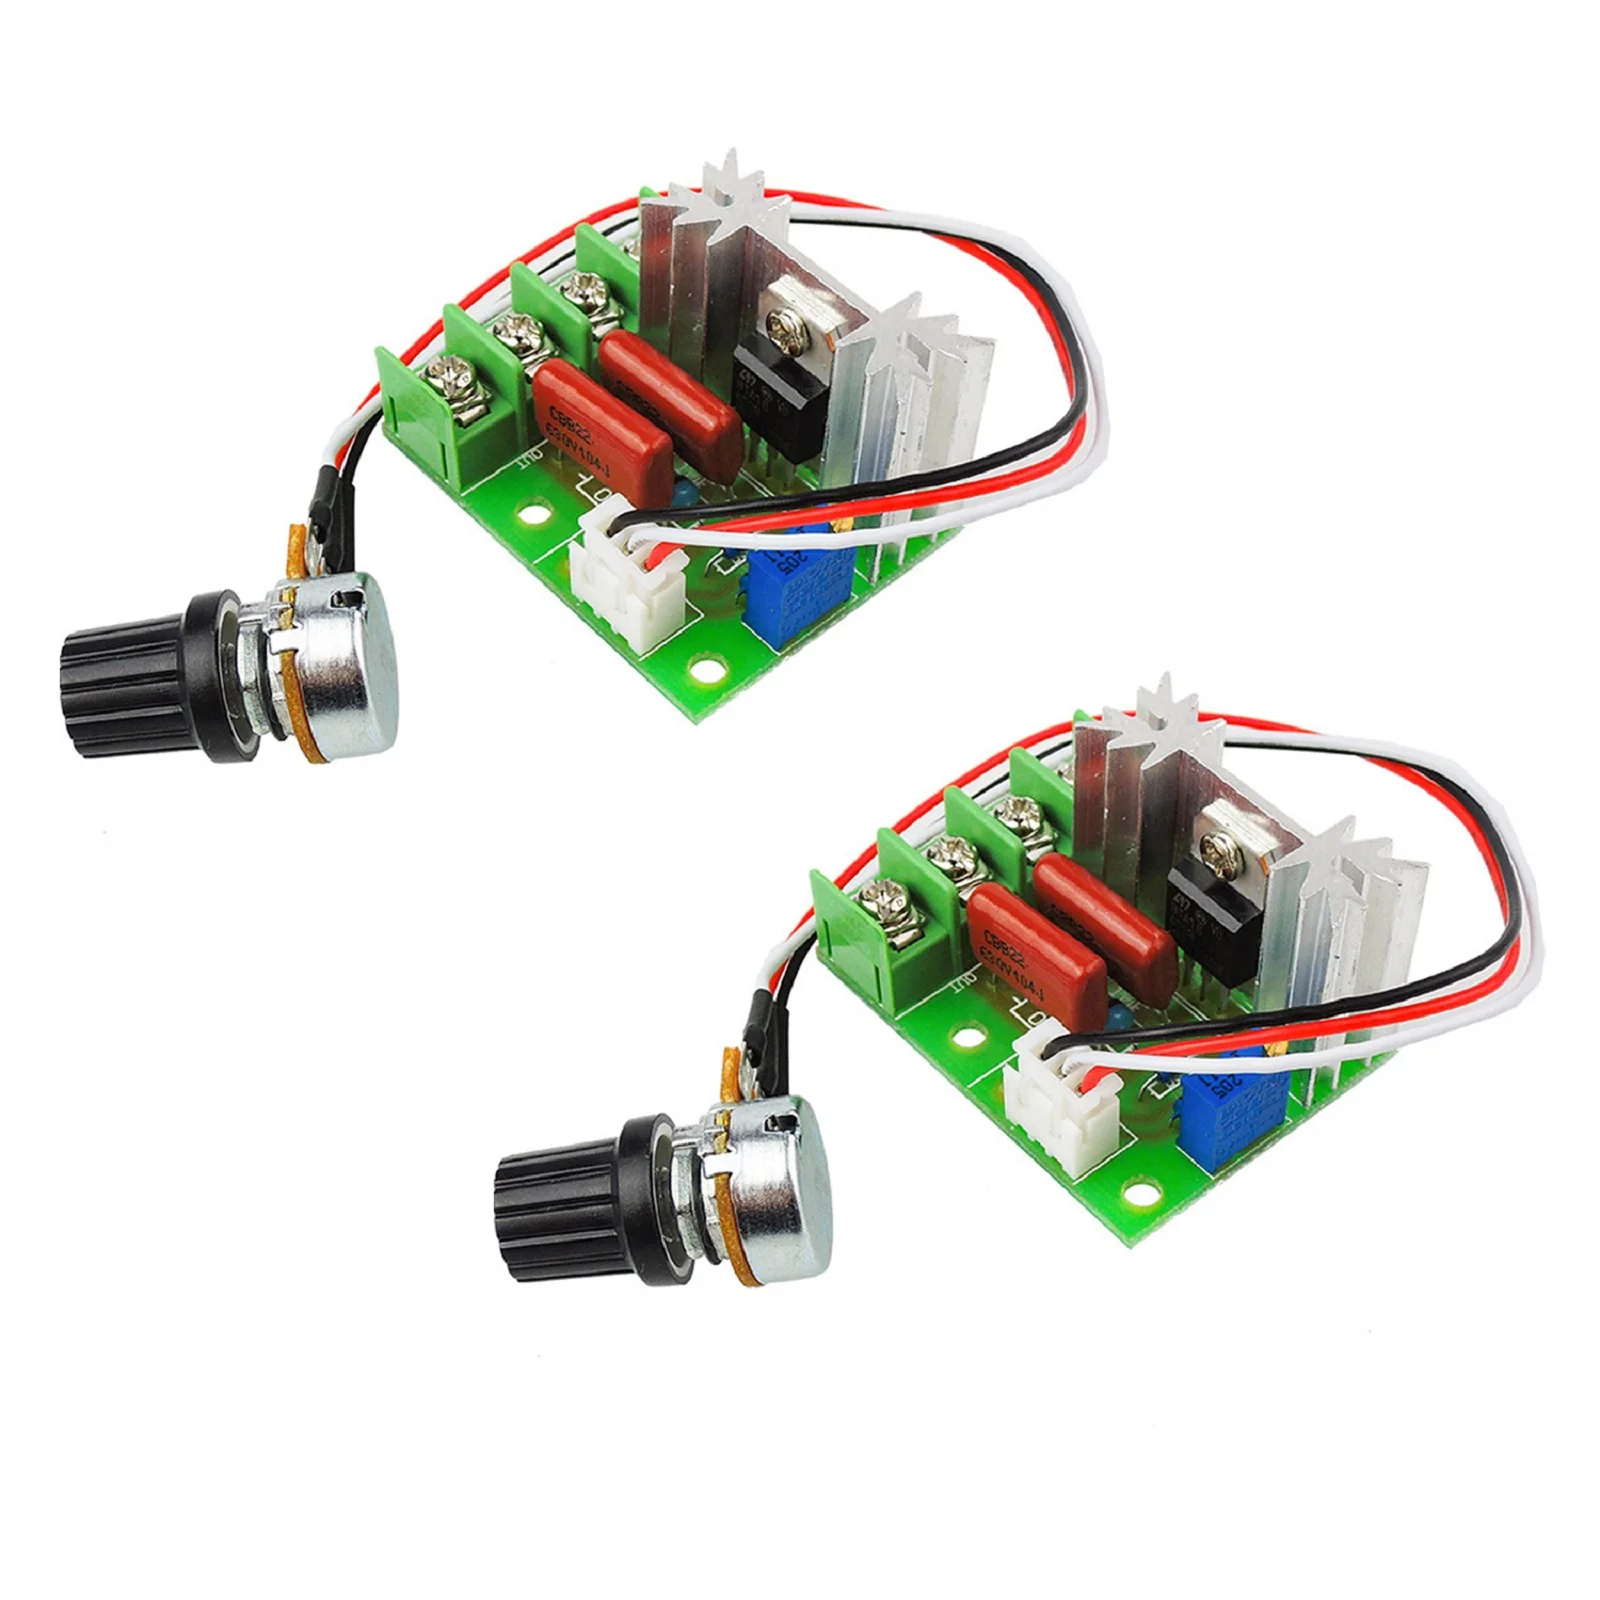 

2Pc Motor Speed Controller With Speed Regulator Knob 2000W SCR Voltage Regulator Dimming Speed And Temperature Automation Motors